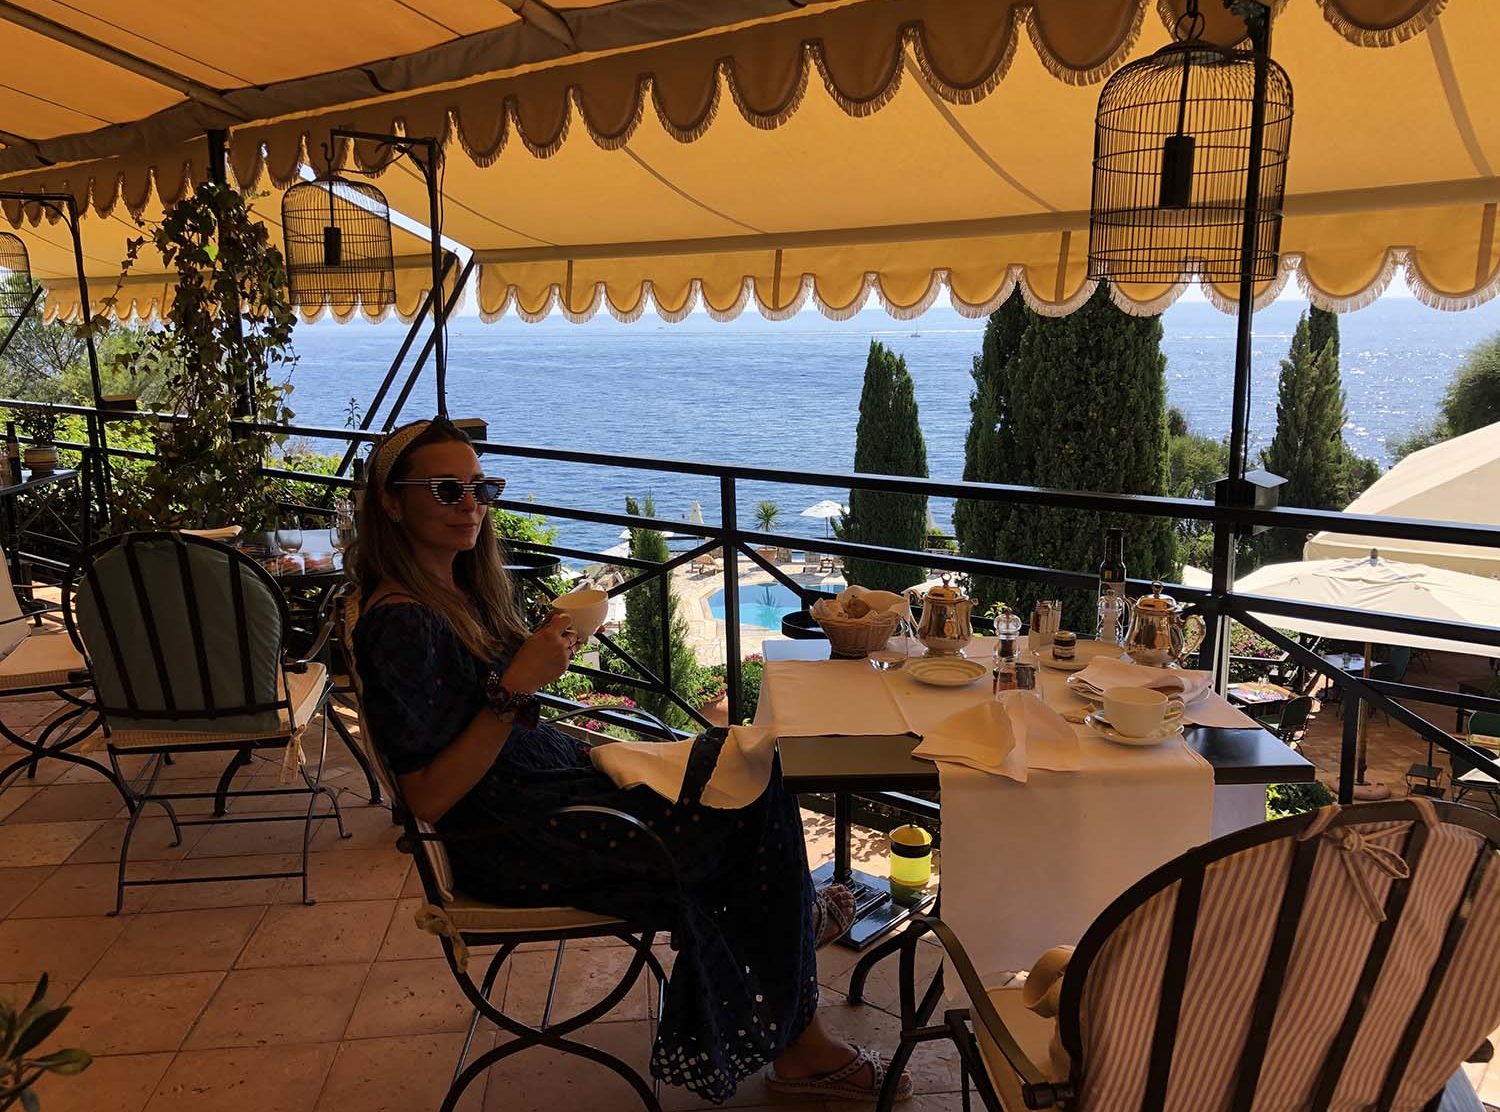 Il Pellicano Breakfast on the terrace overlooking the Mediterranean, served by the ultra choreographed service Il Pellicano is known for.